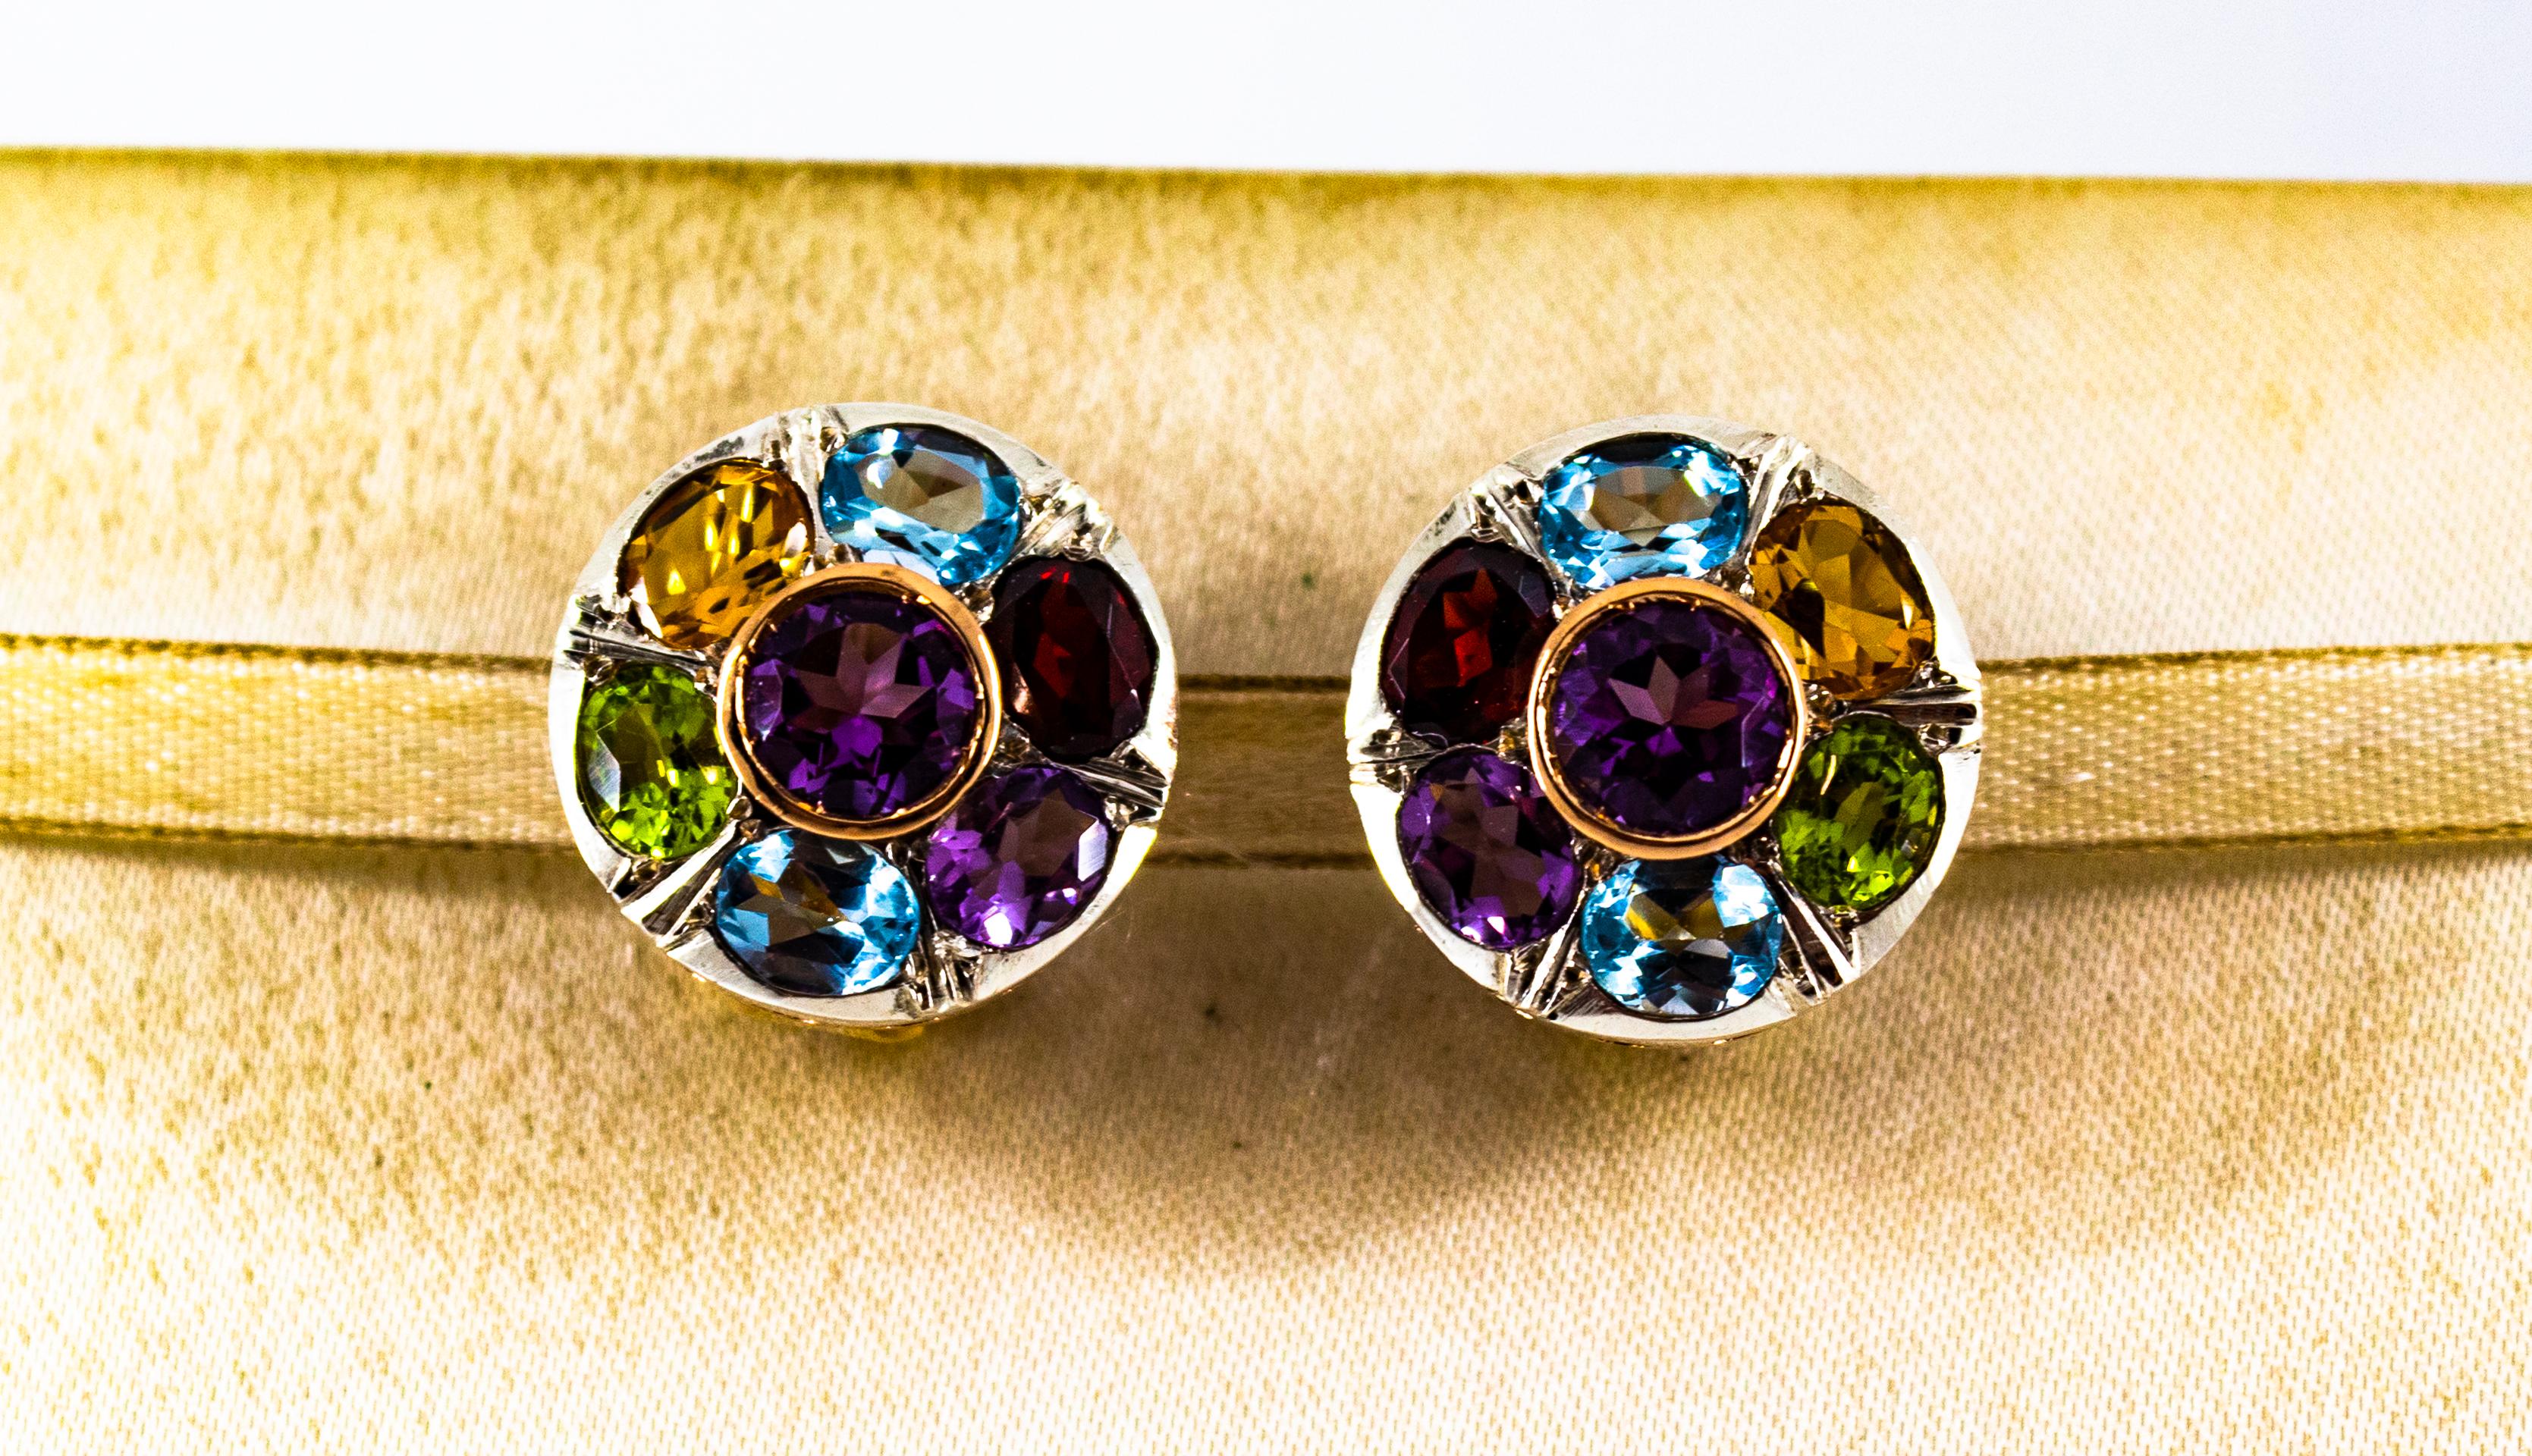 These Earrings are made of 9K Yellow Gold and Sterling Silver.
These Earrings have 12.00 Carats circa of Blue Topaz, Amethyst, Citrine, Garnet and Peridot.

These Earrings are also available in a bigger version.
These Earrings are available also in